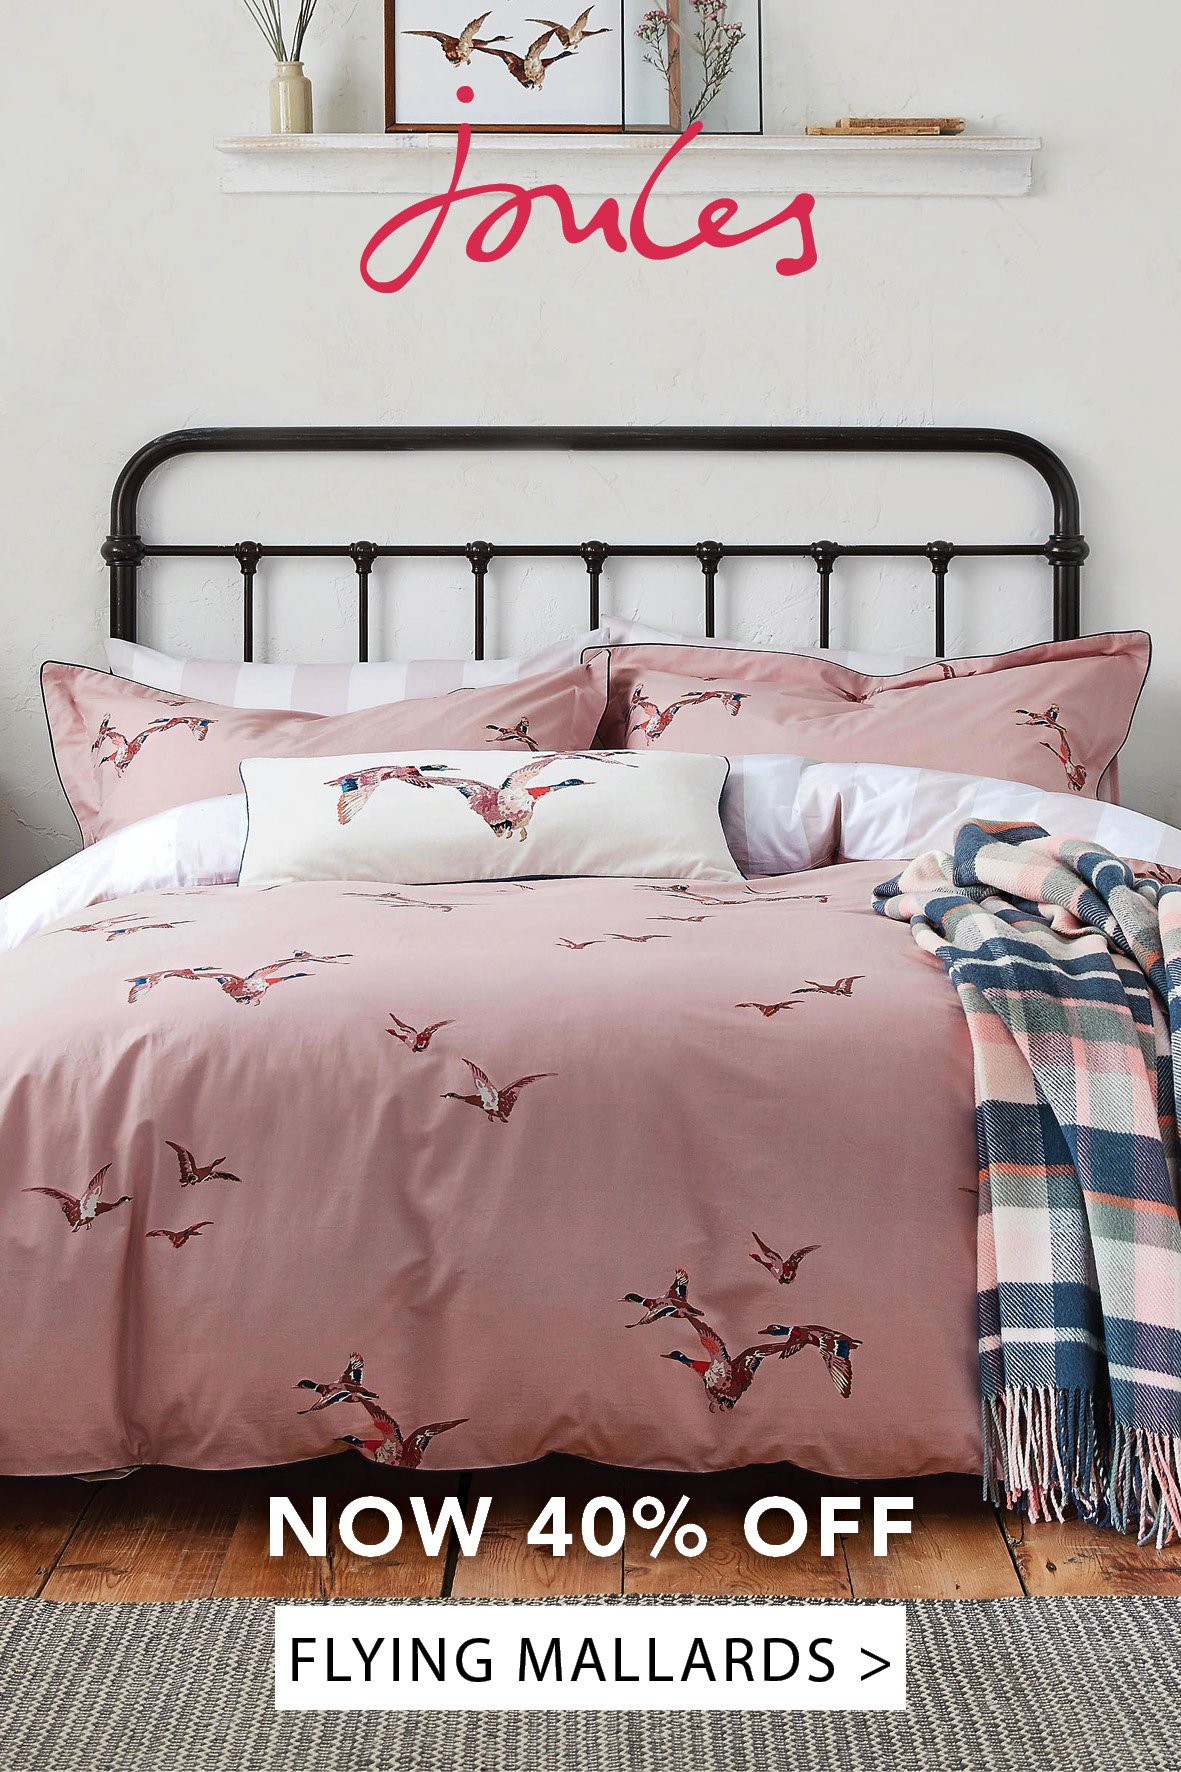 Joules Flying Mallards Bedding in Pink